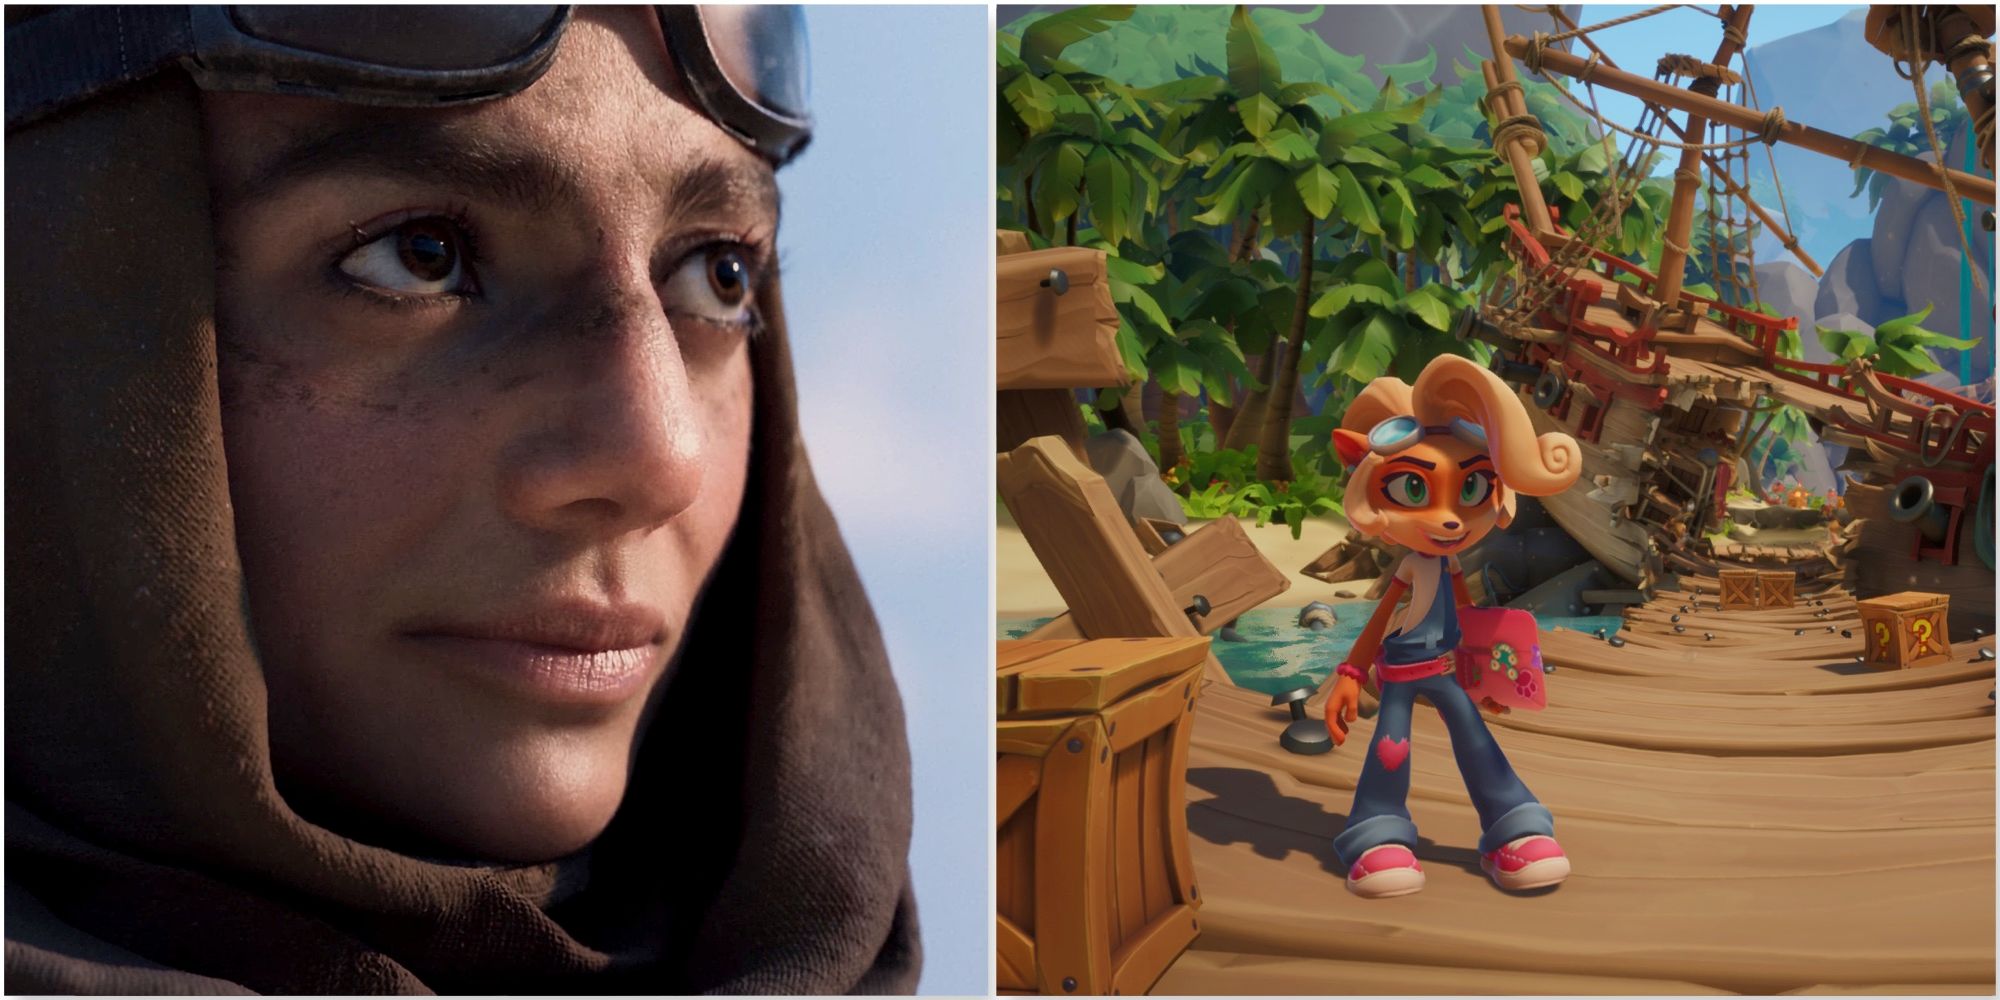 Farah in Call of Duty Modern Warfare 2 and Coco in Crash Bandicoot 4 It's About Time